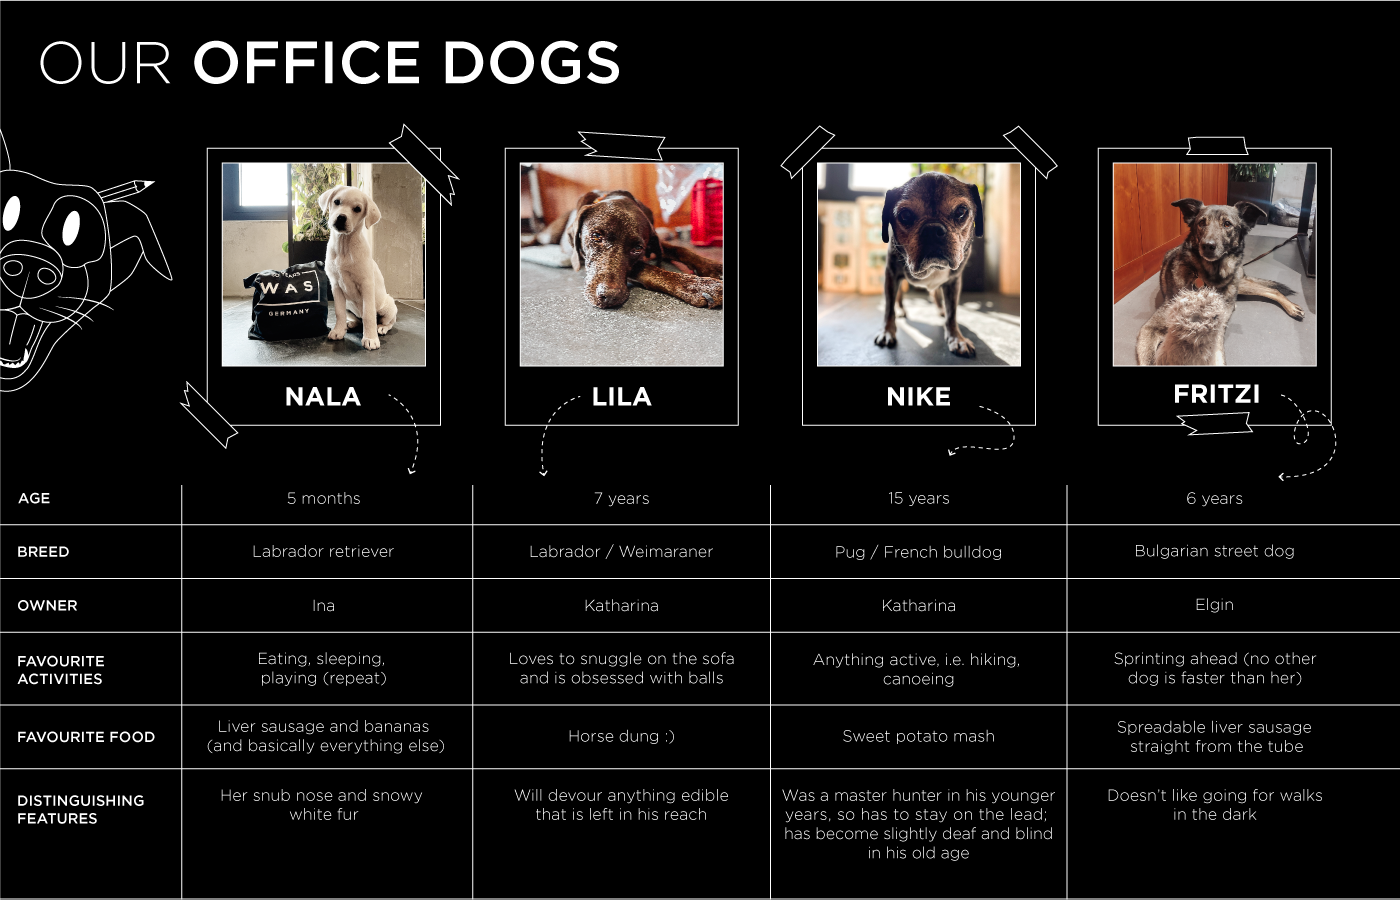 Introduction to our office dogs at WAS Germany